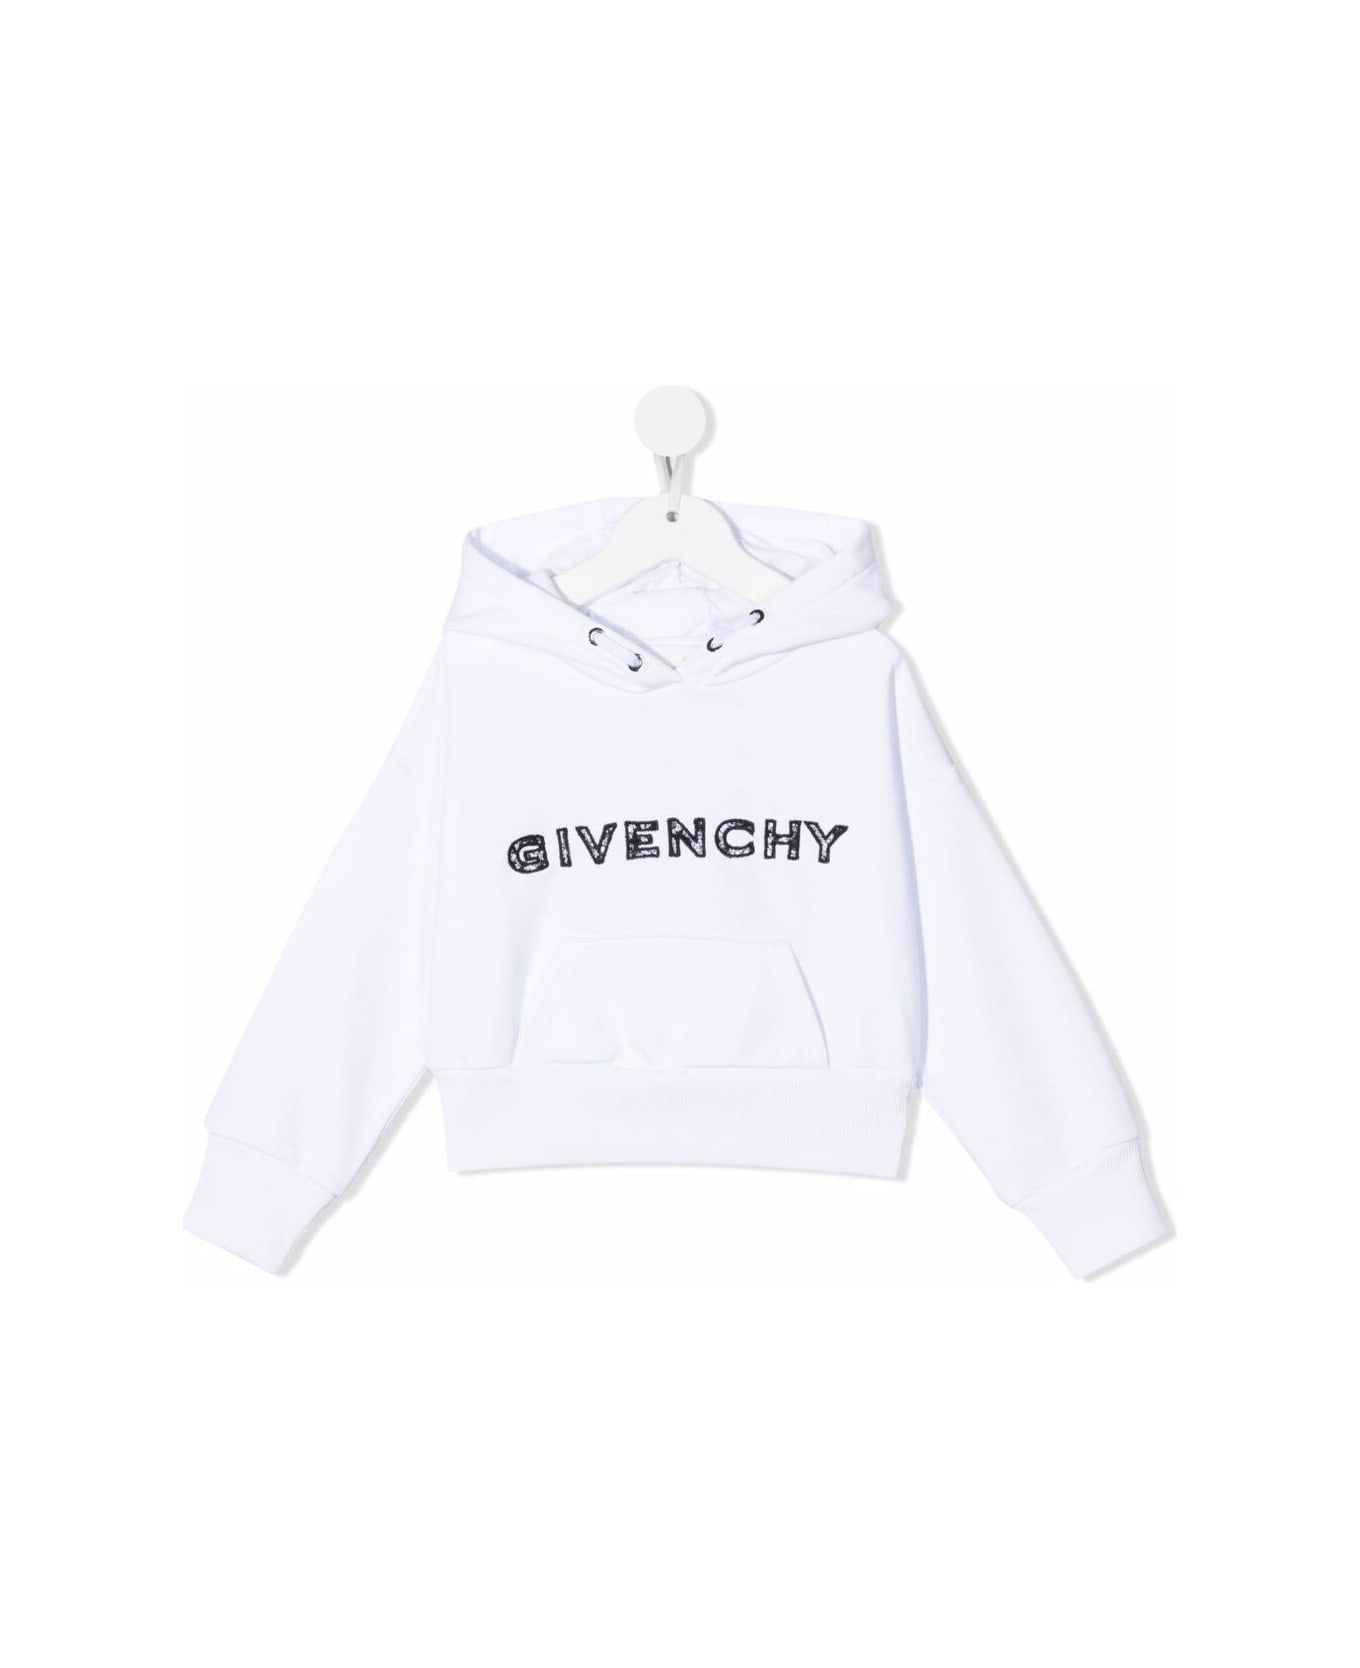 Givenchy Girl White Blend Cotton Hoodie With Embroidery Logo - White